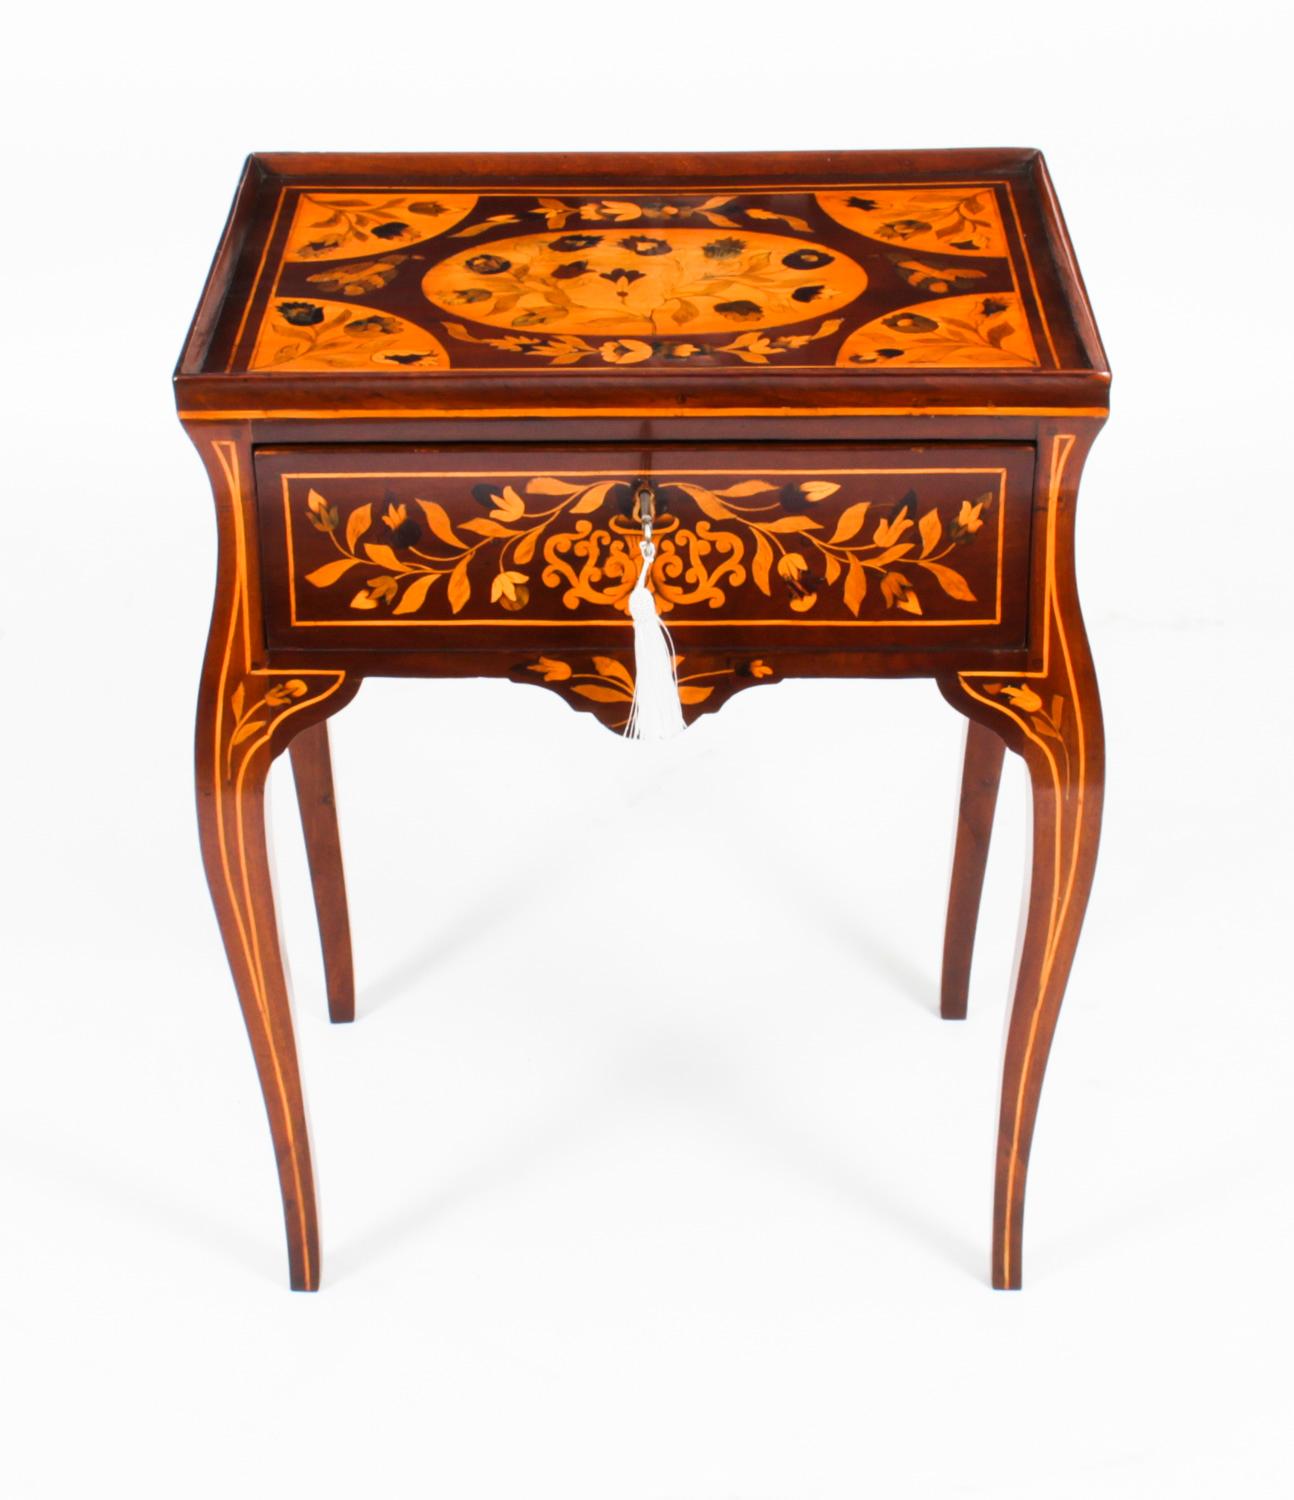 This is a stunning antique early 19th century Dutch floral marquetry tray top bedside cabinet / side table, circa 1820 in date.

This splendid cabinet has been accomplished in striking figured mahogany. The galleried top is decorated with a plethora